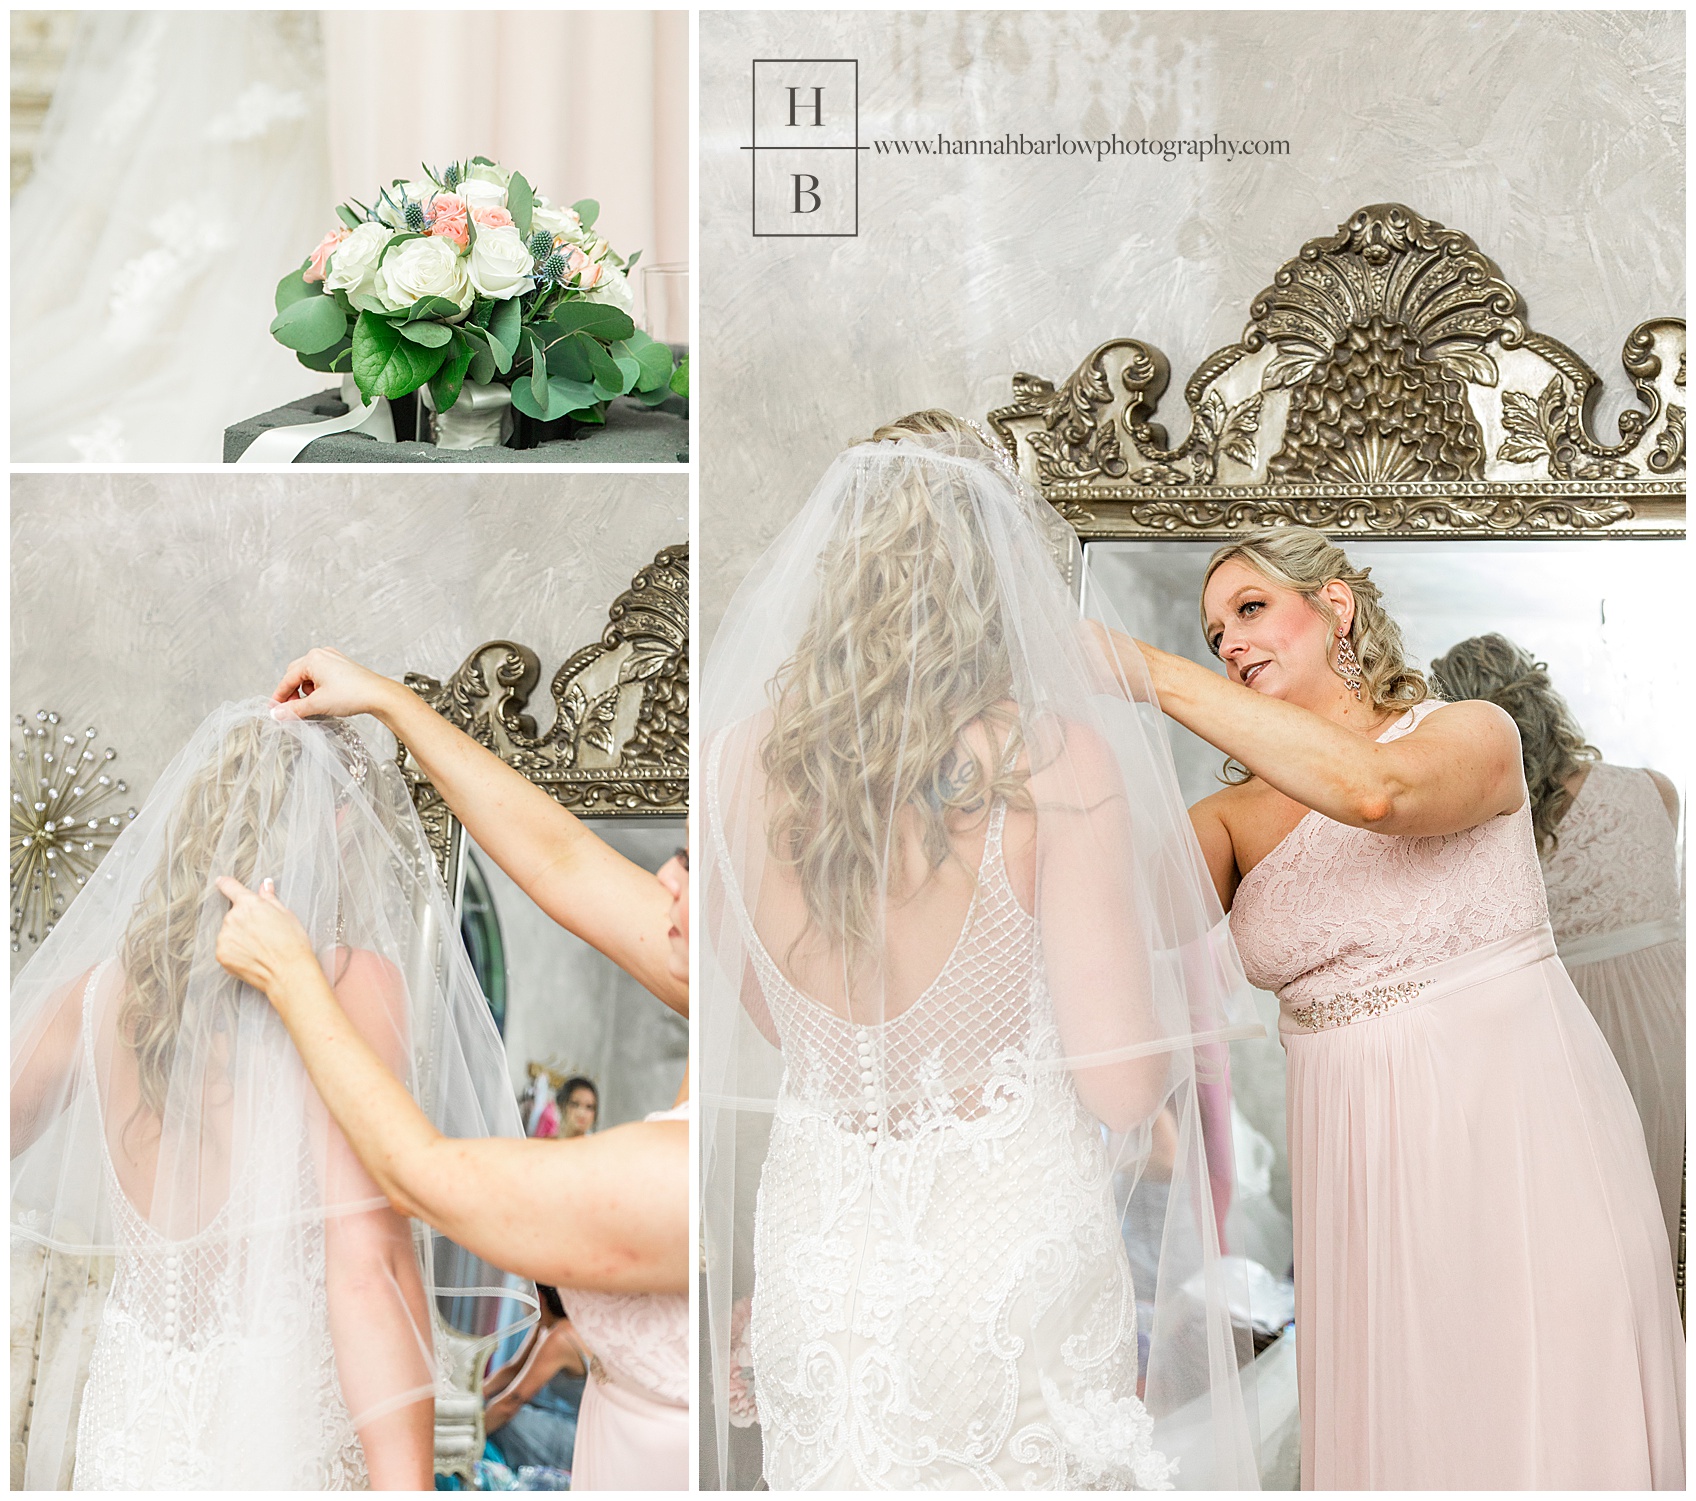 Mother Placing Veil on Bride at Bella Amore in Dennison Ohio